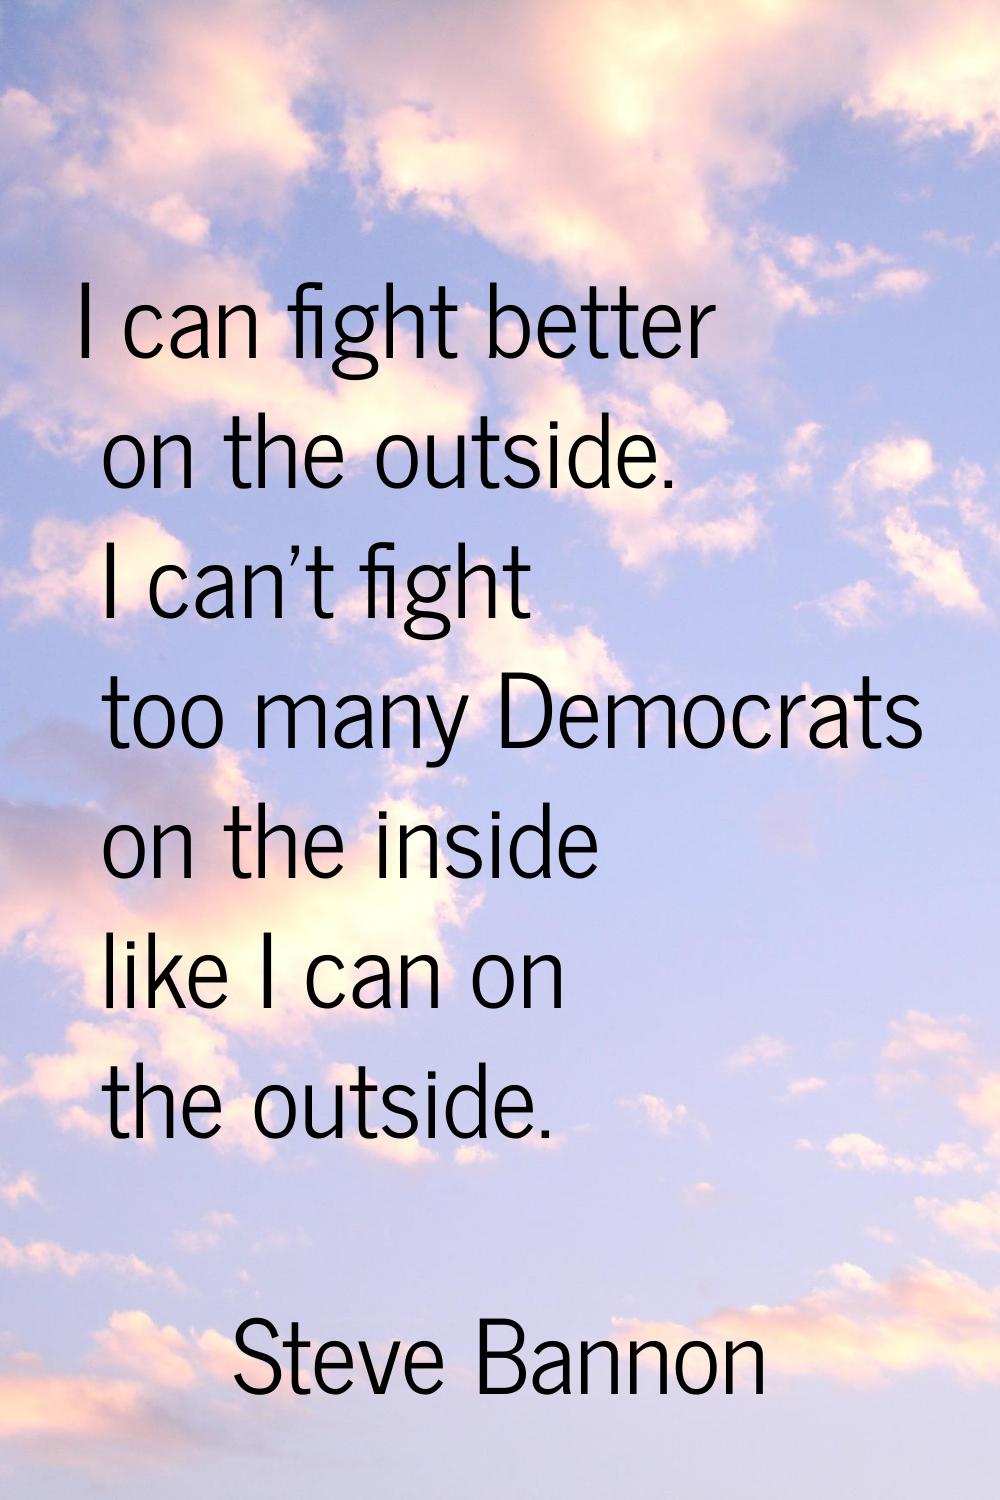 I can fight better on the outside. I can't fight too many Democrats on the inside like I can on the